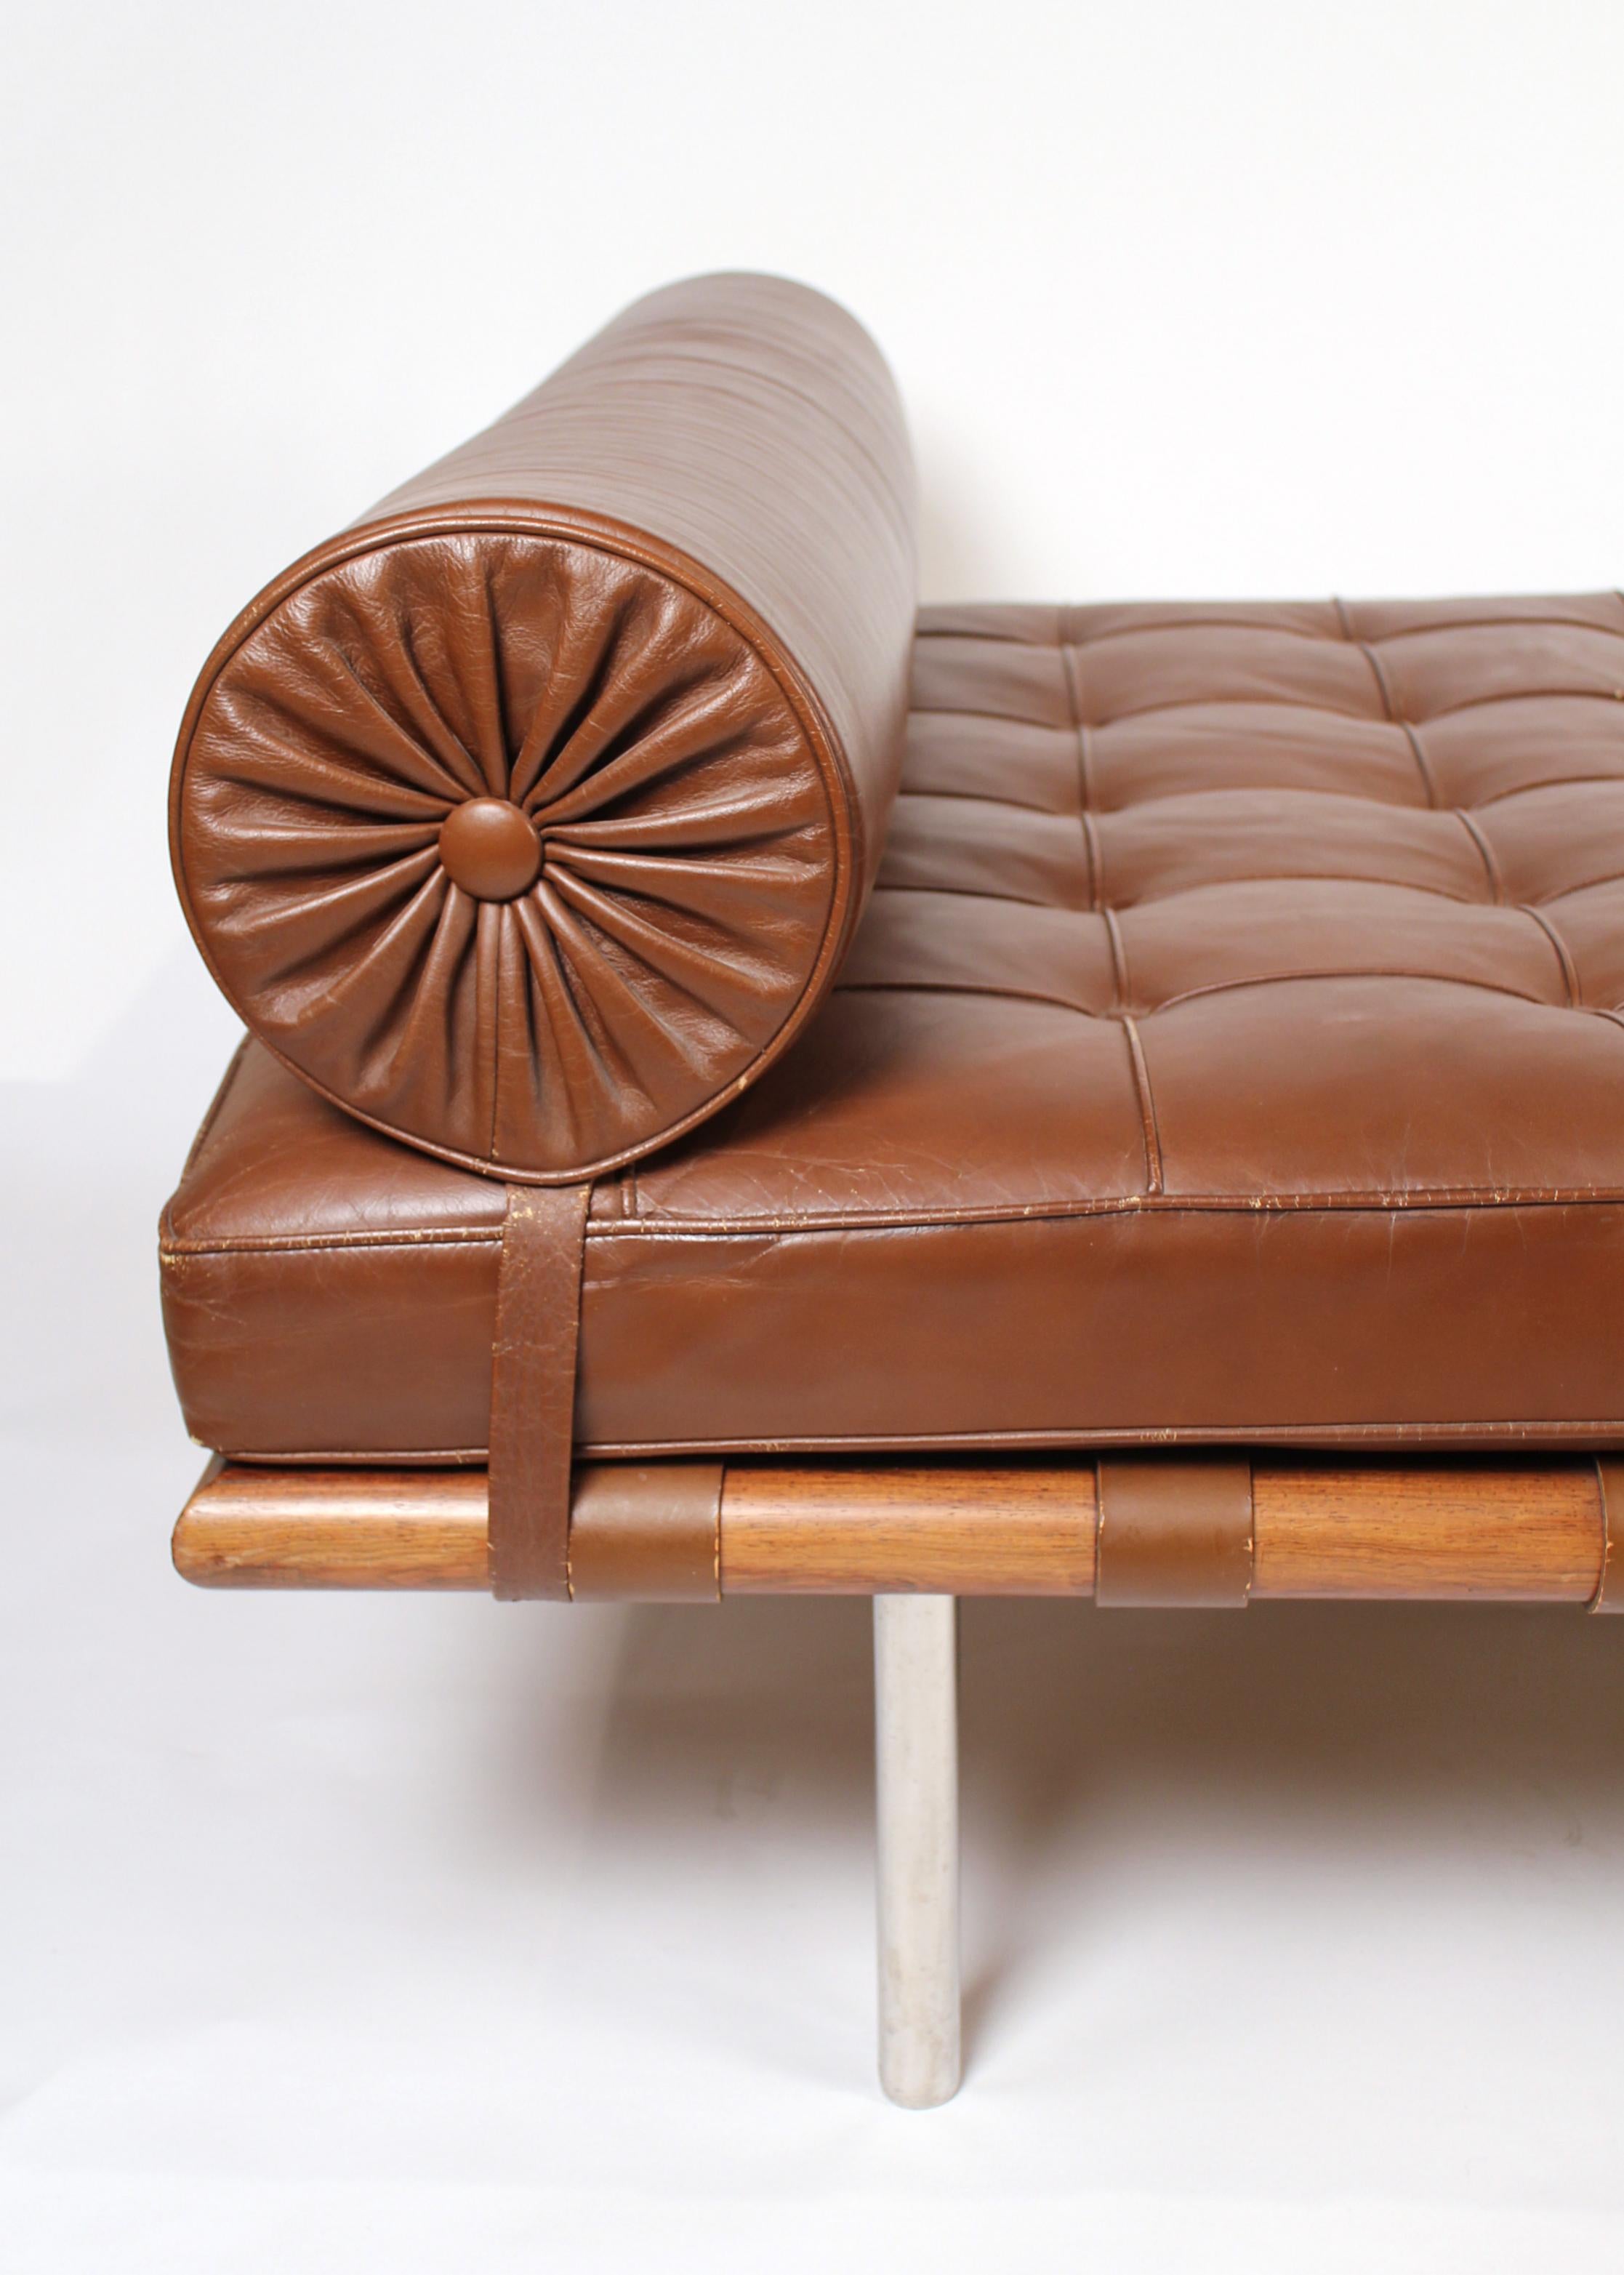 Bauhaus Early Production, Rosewood Daybed designed by Ludwig Mies van der Rohe